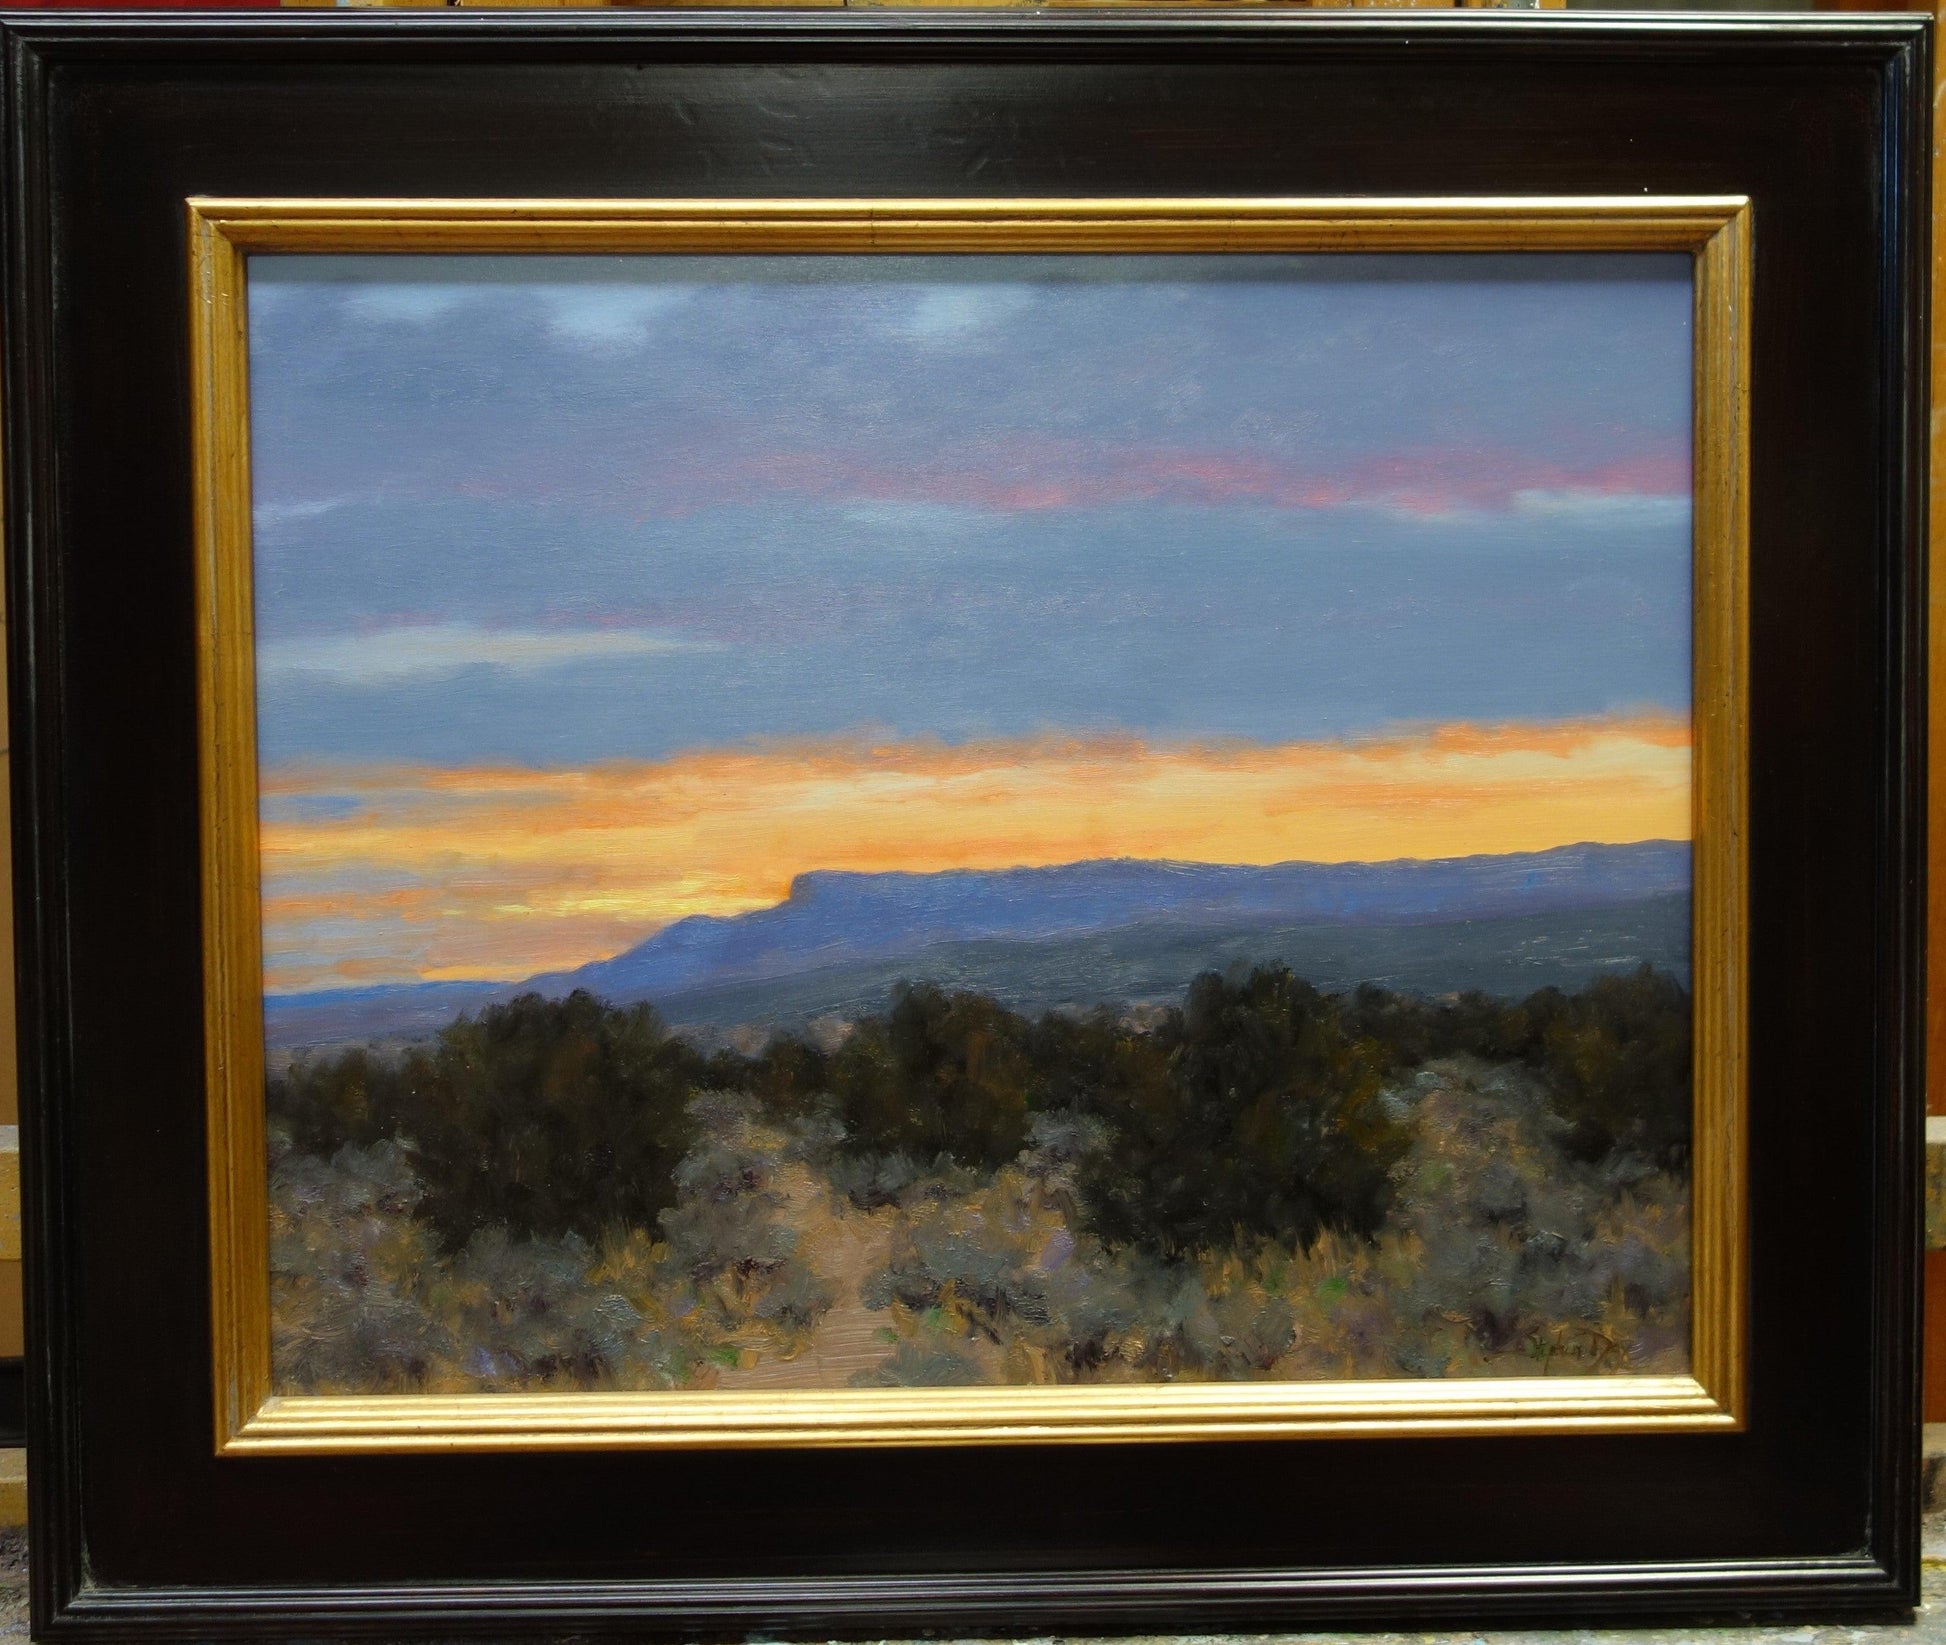 Late Light Over A Distant Mesa-Painting-Stephen Day-Sorrel Sky Gallery